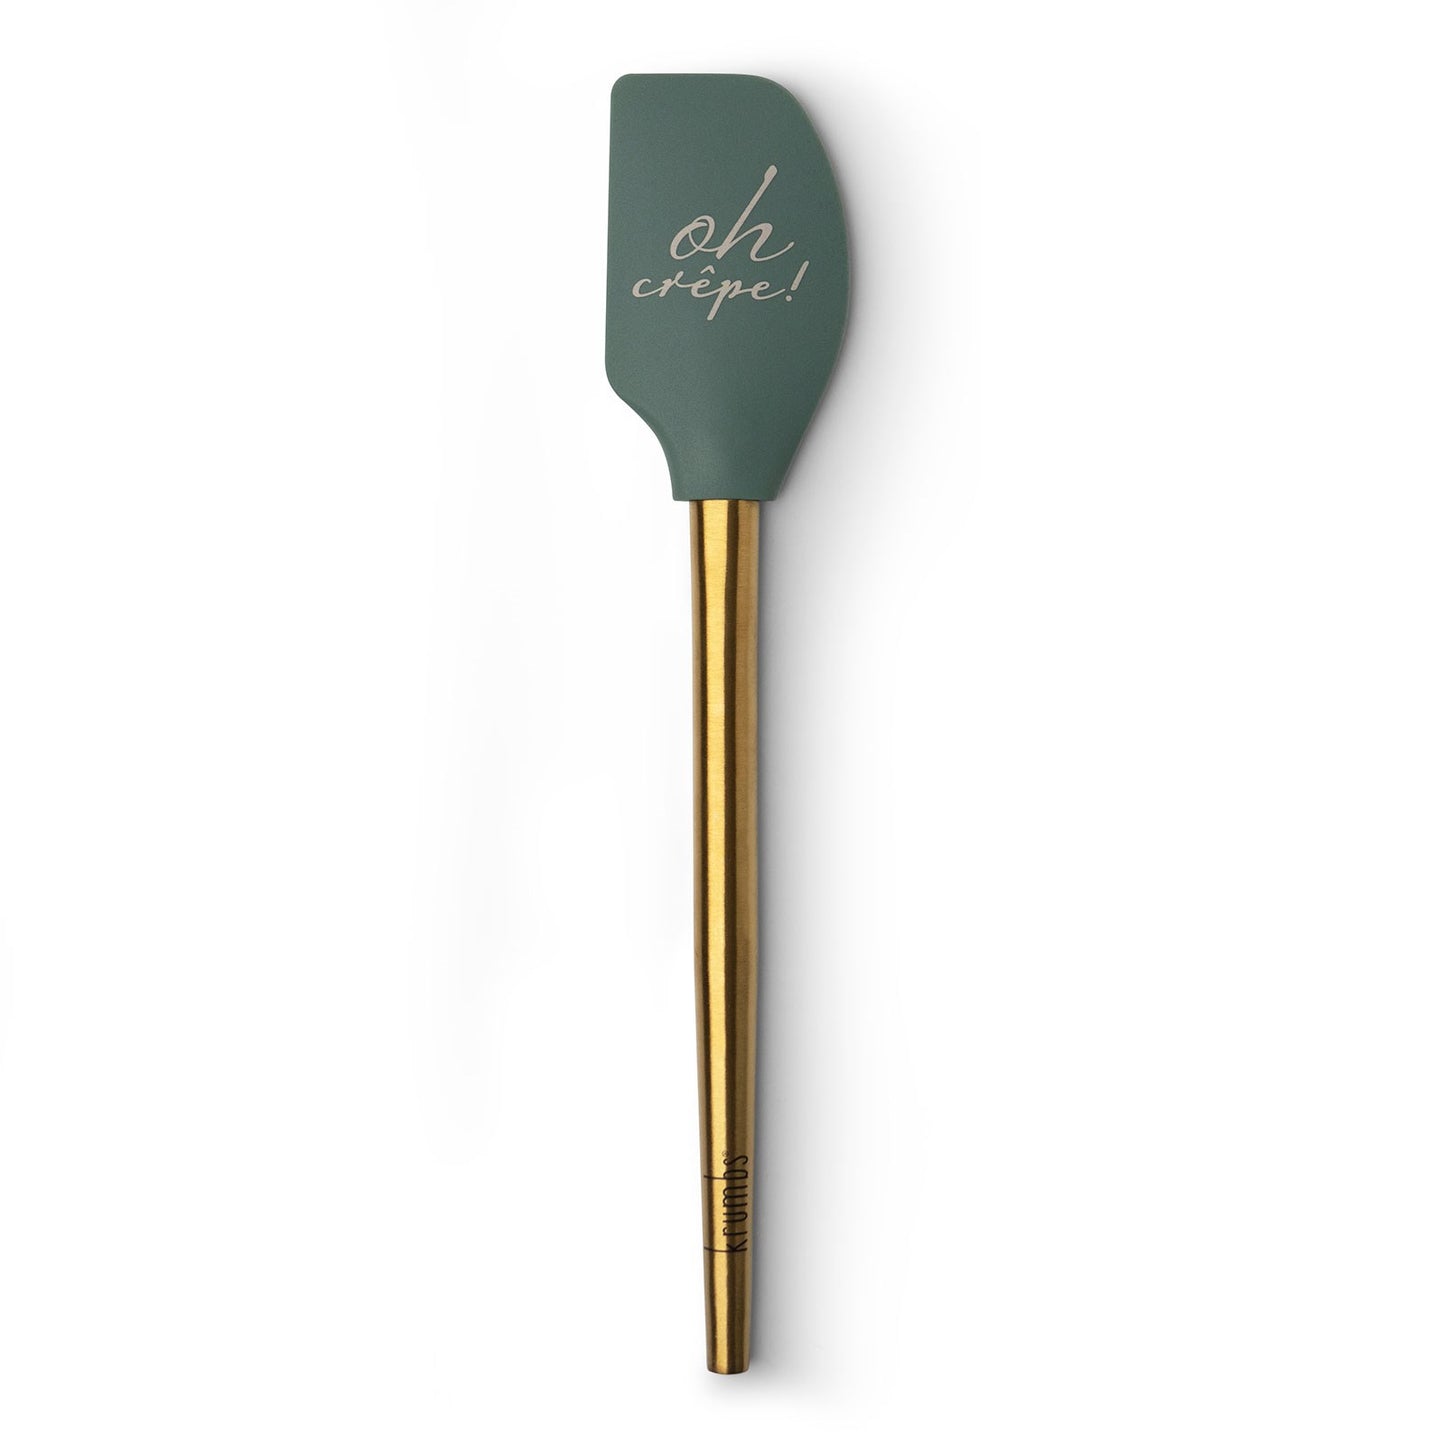 oh crepe elements spatula on a white background